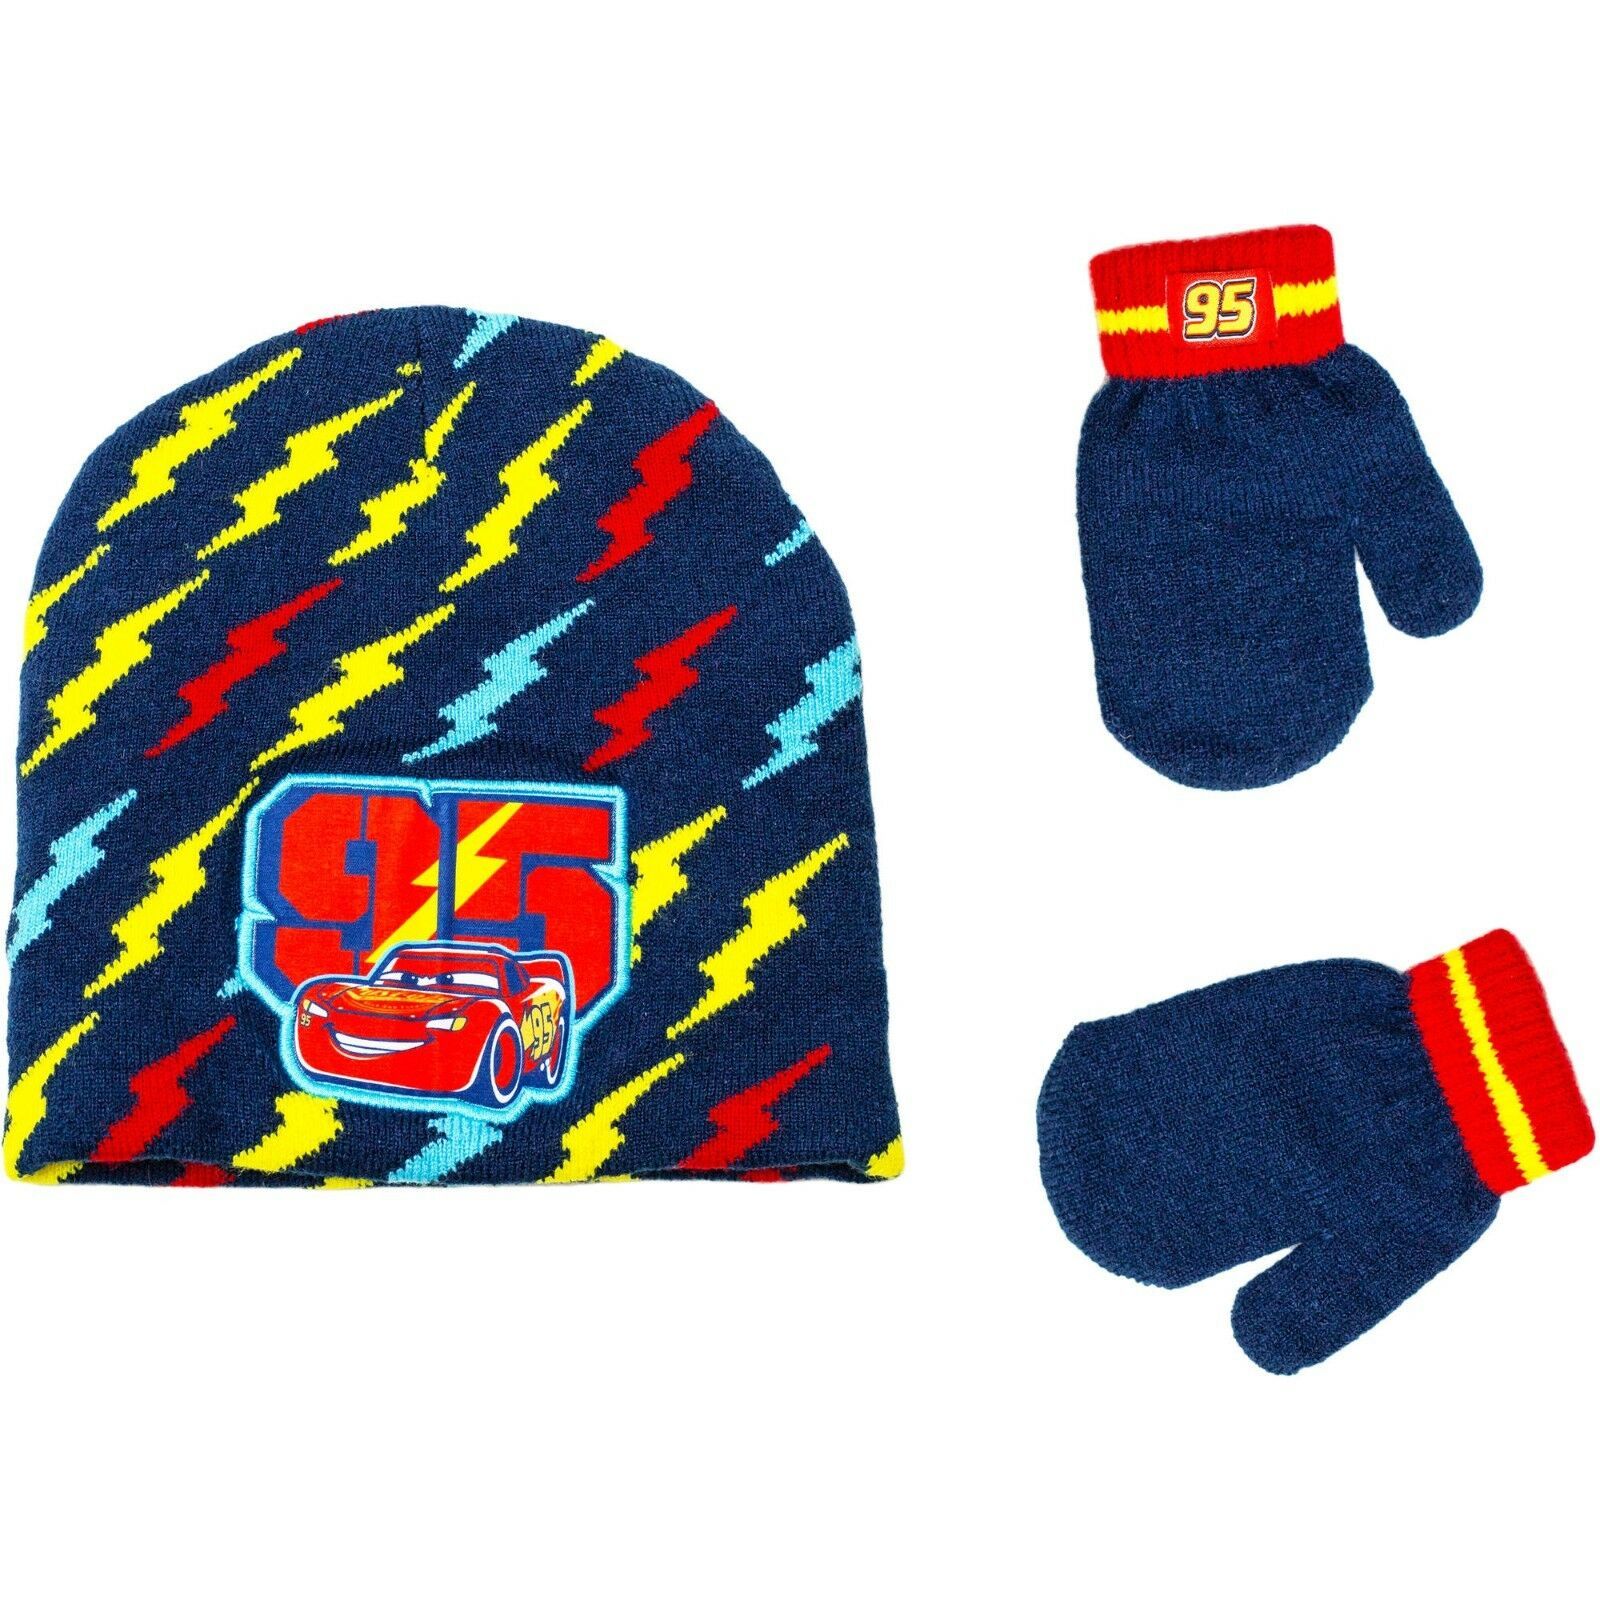 Toddler Boys Cars Hat and Mittens 2T-5T Disney Lightning McQueen Knit Cap - $7.99